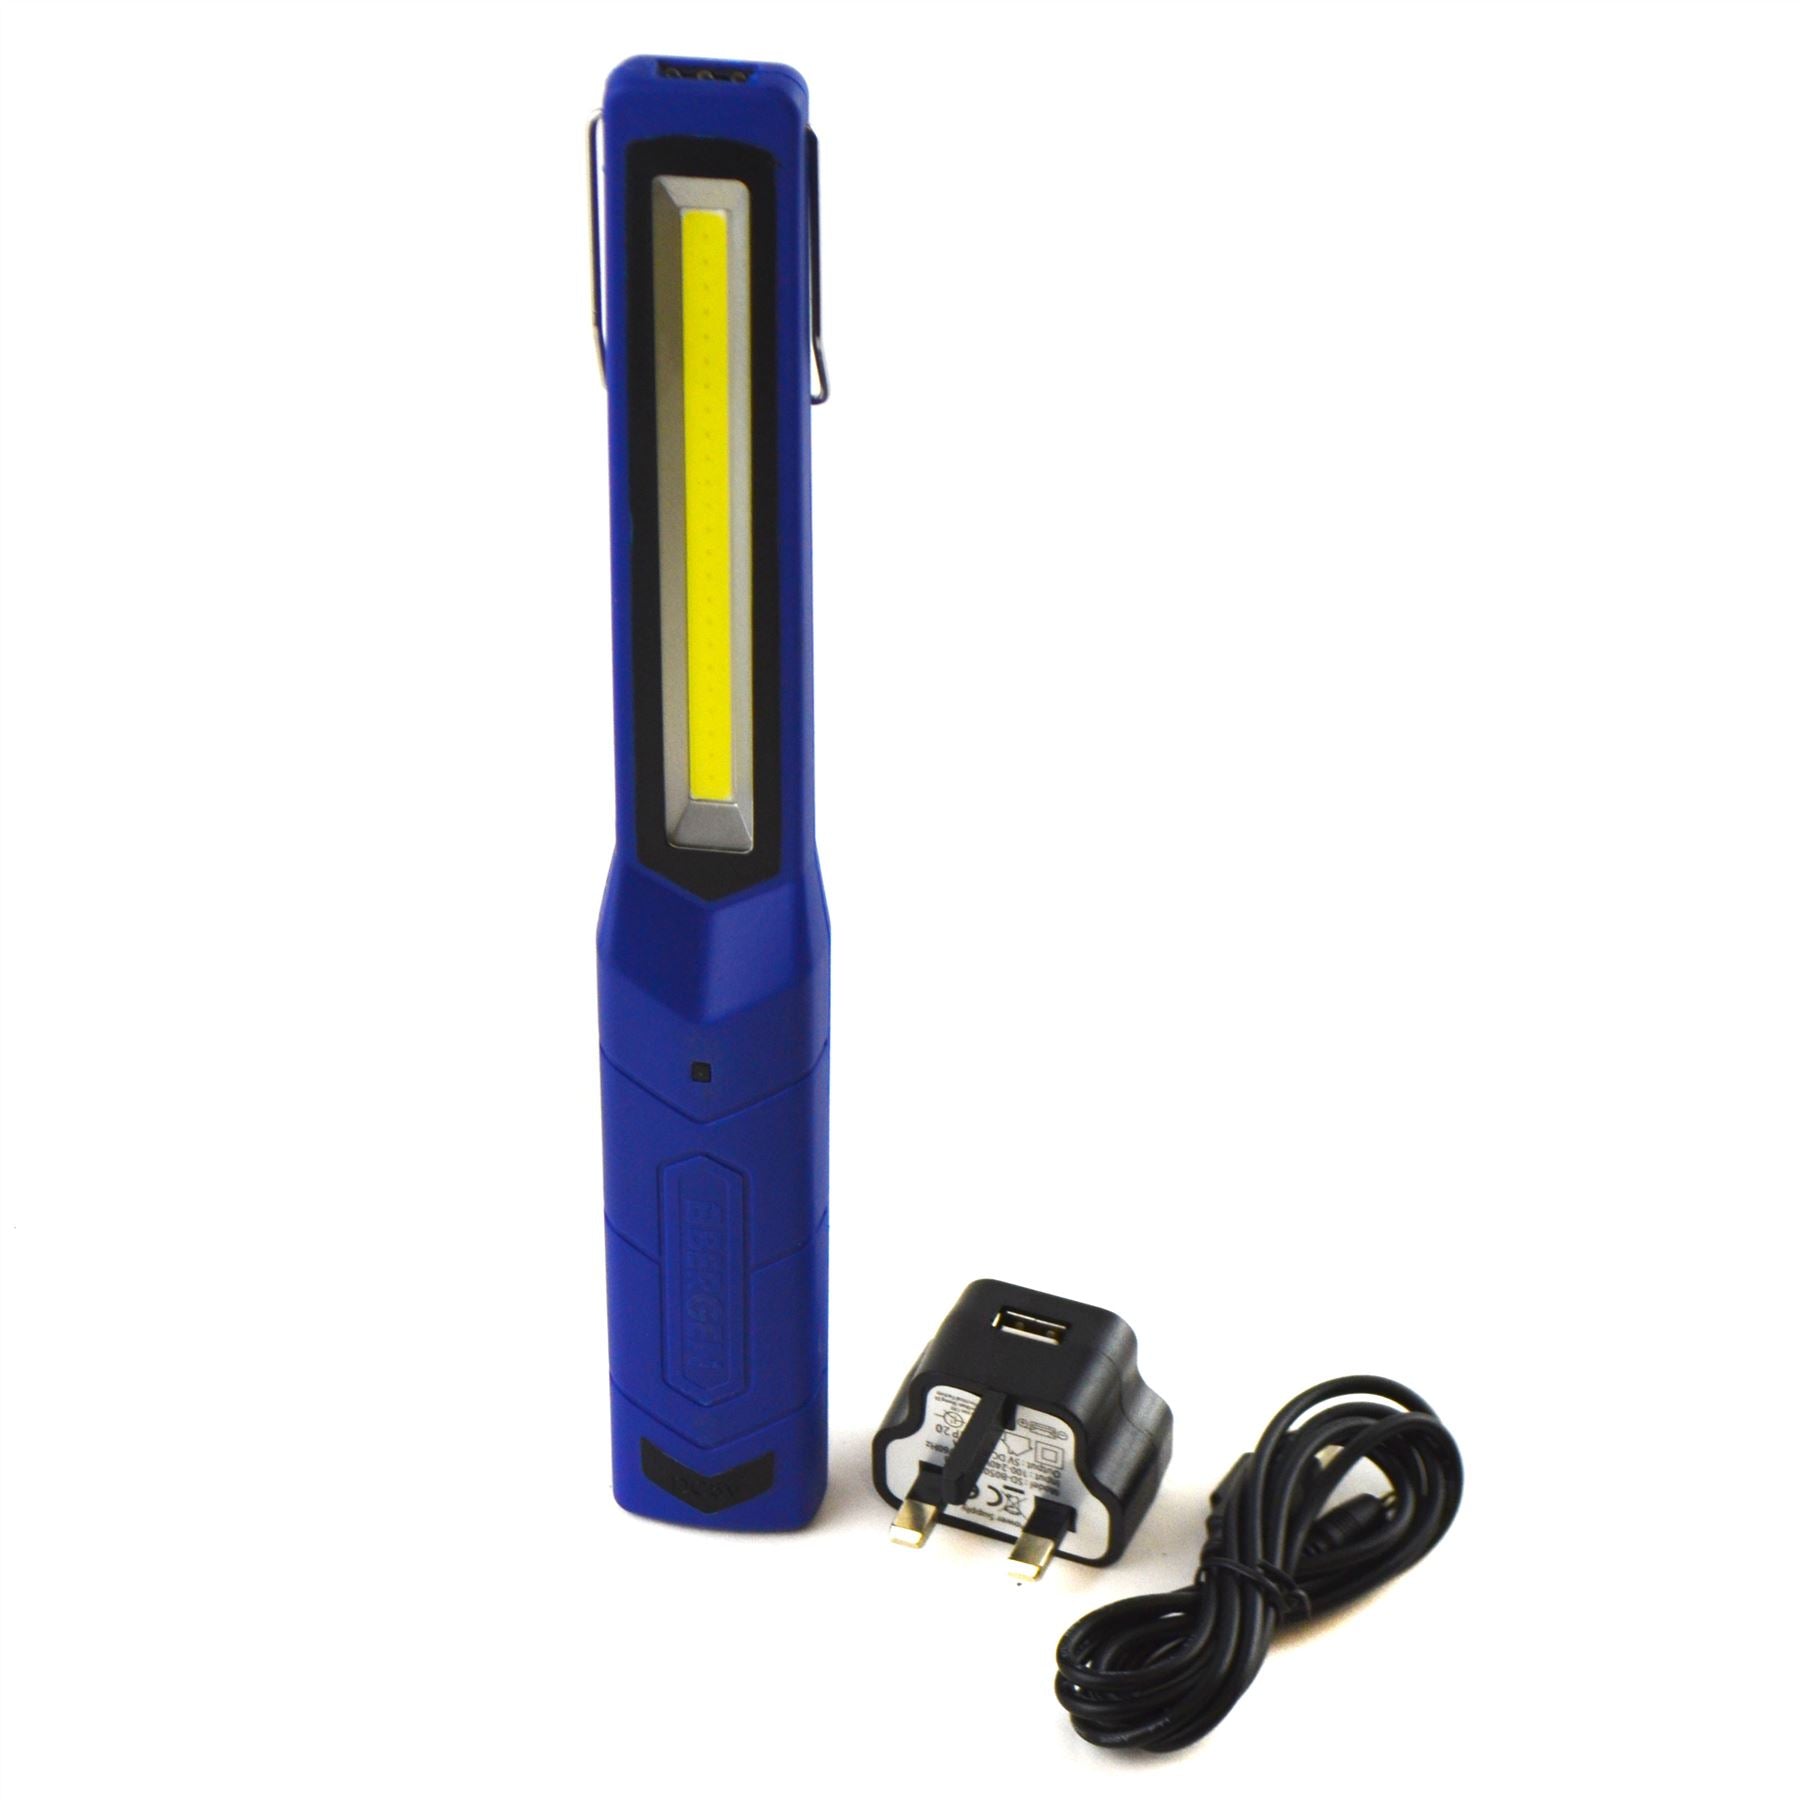 Slim Super Bright Rechargeable Work COB Light Torch Mains And USB Charger